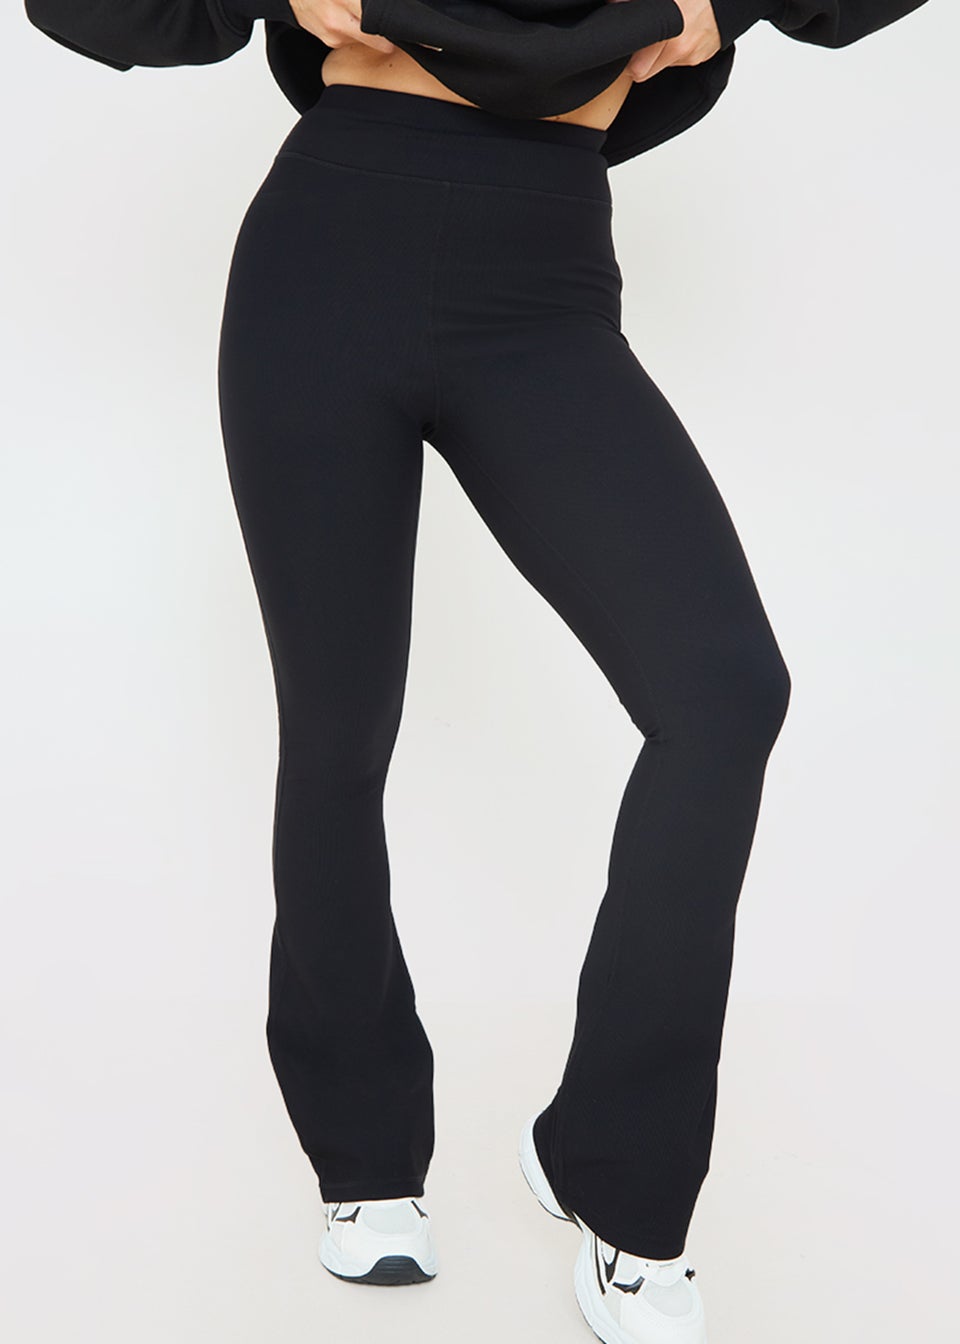 In the Style Jac Jossa Black Ribbed Trousers - Matalan